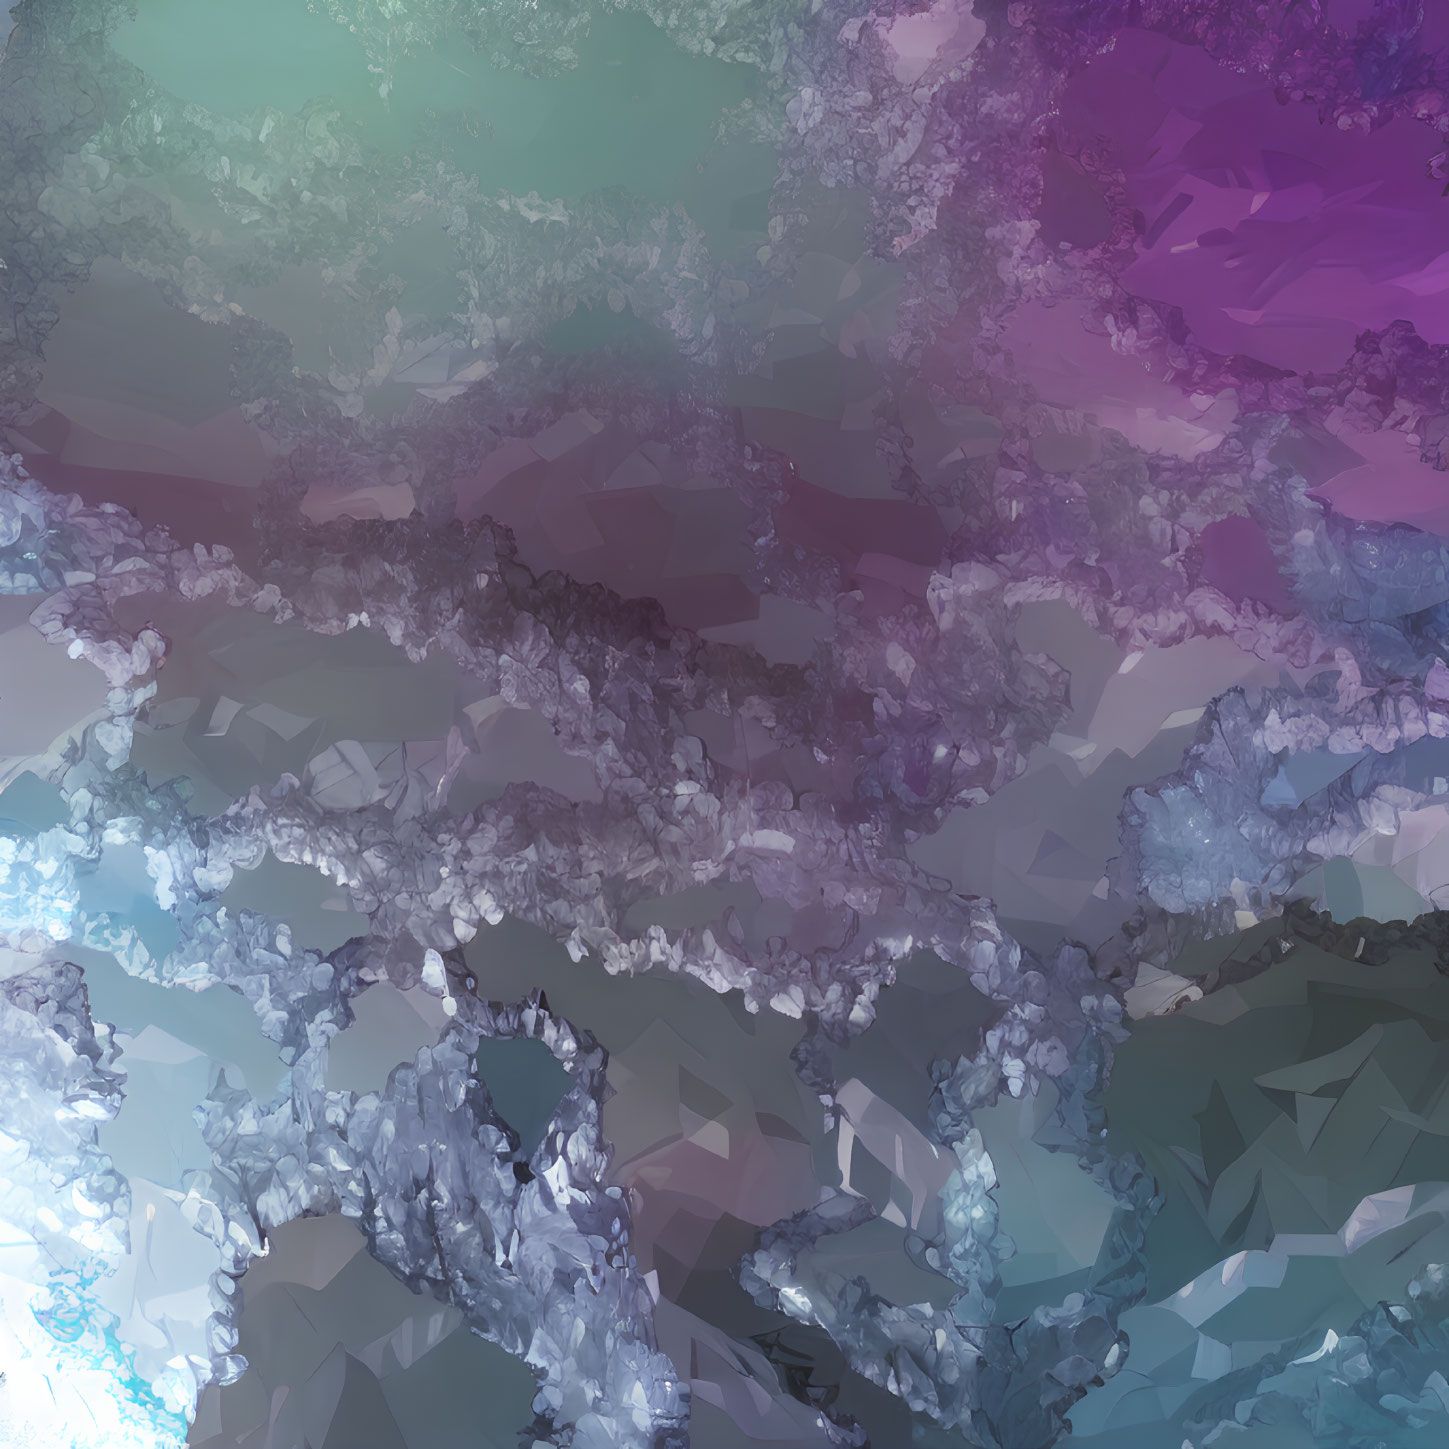 Abstract Digital Painting: Textured Crystalline Geode in Purple, Blue & Green